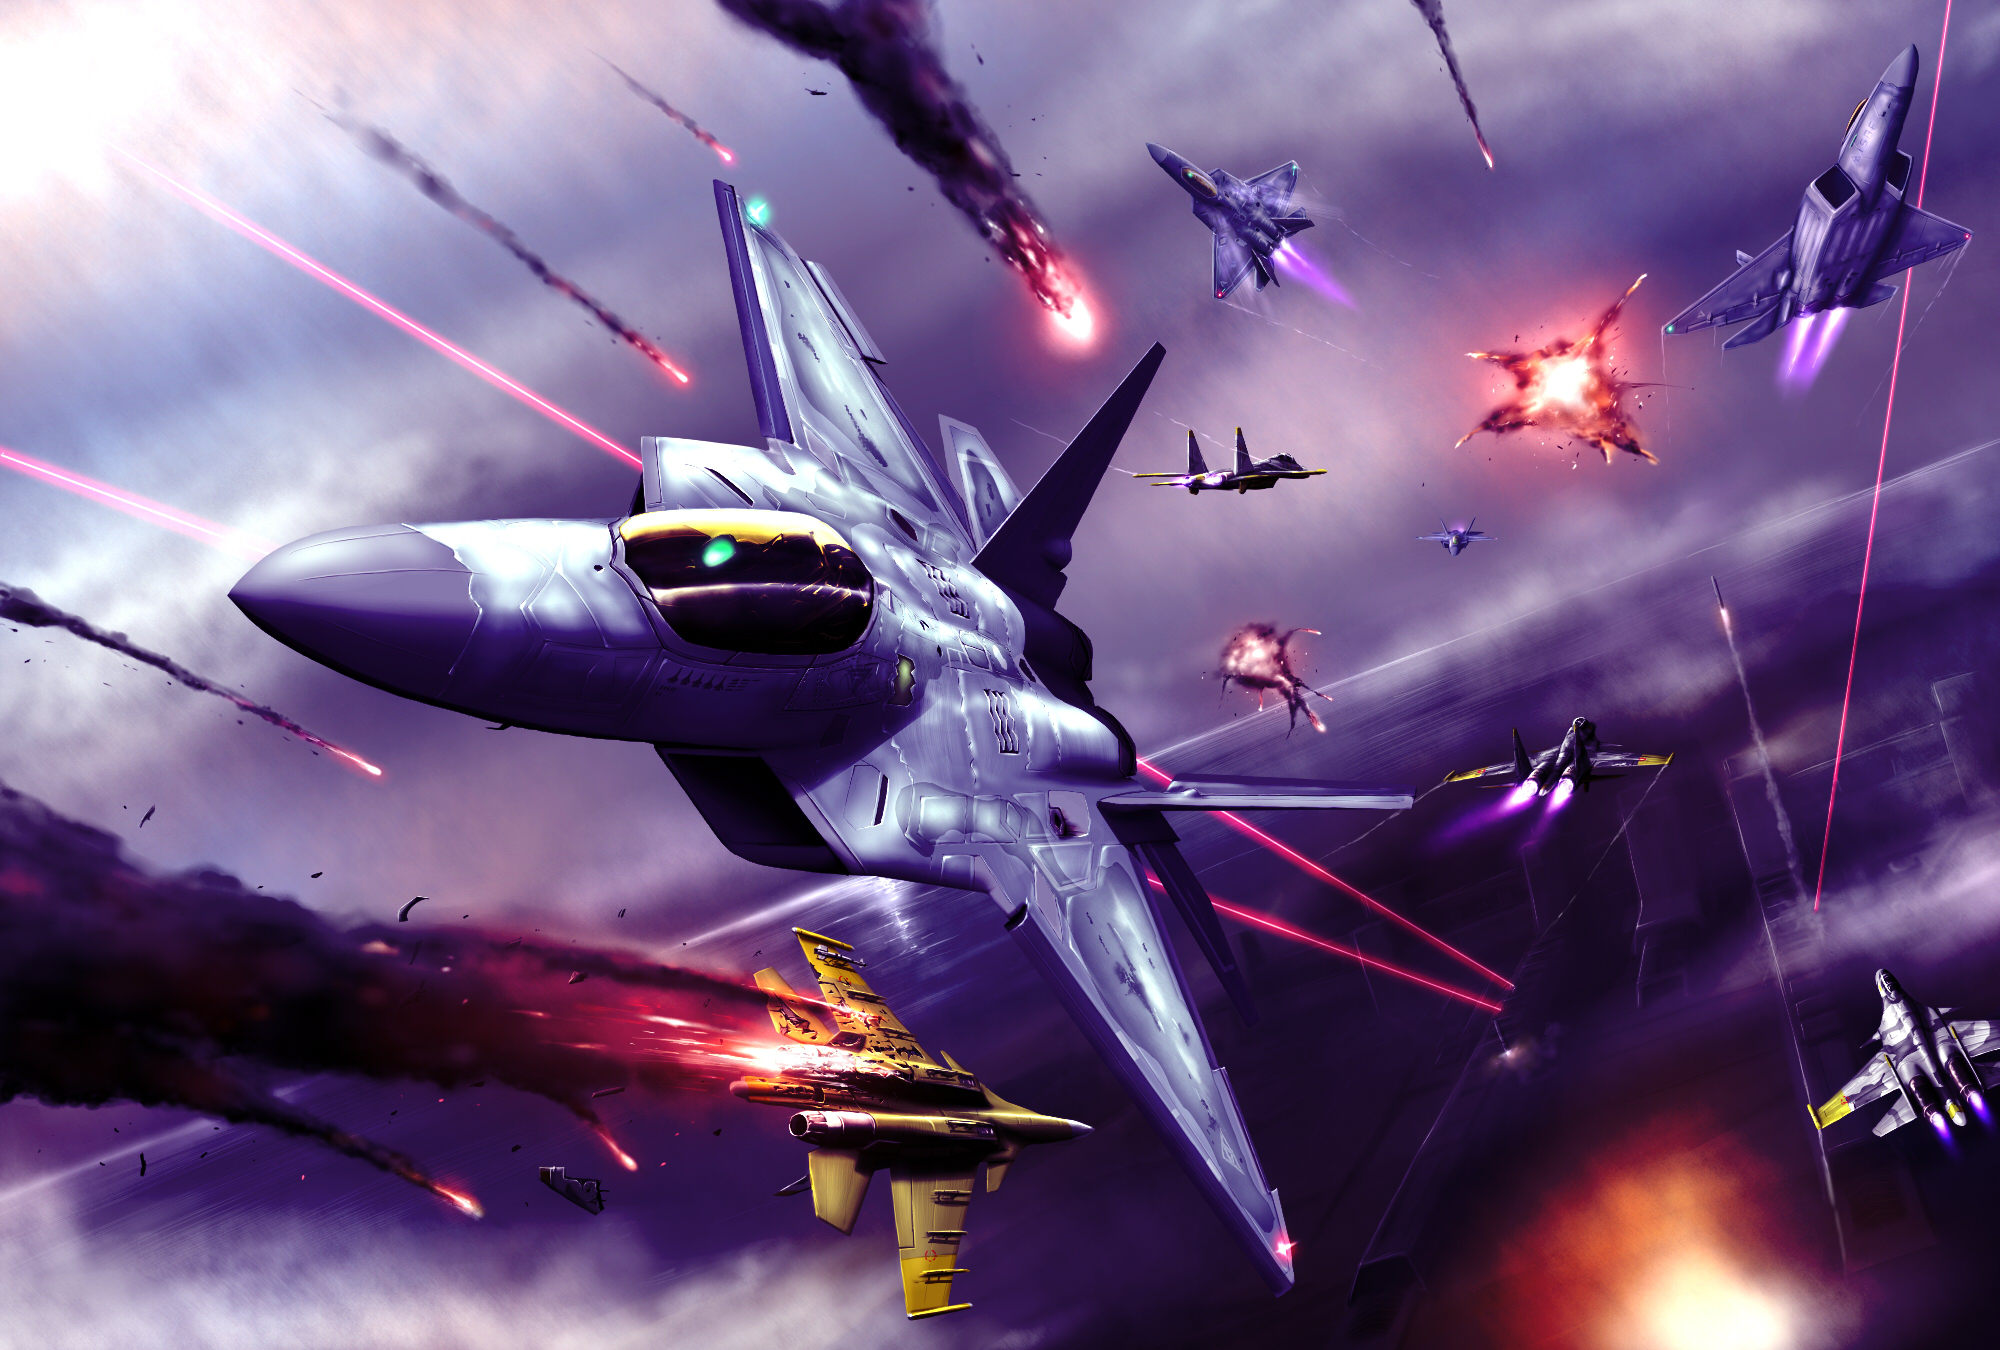 ace, Combat, Game, Jet, Airplane, Aircraft, Fighter, Plane, Military, Battle, Weapon, Missile Wallpaper